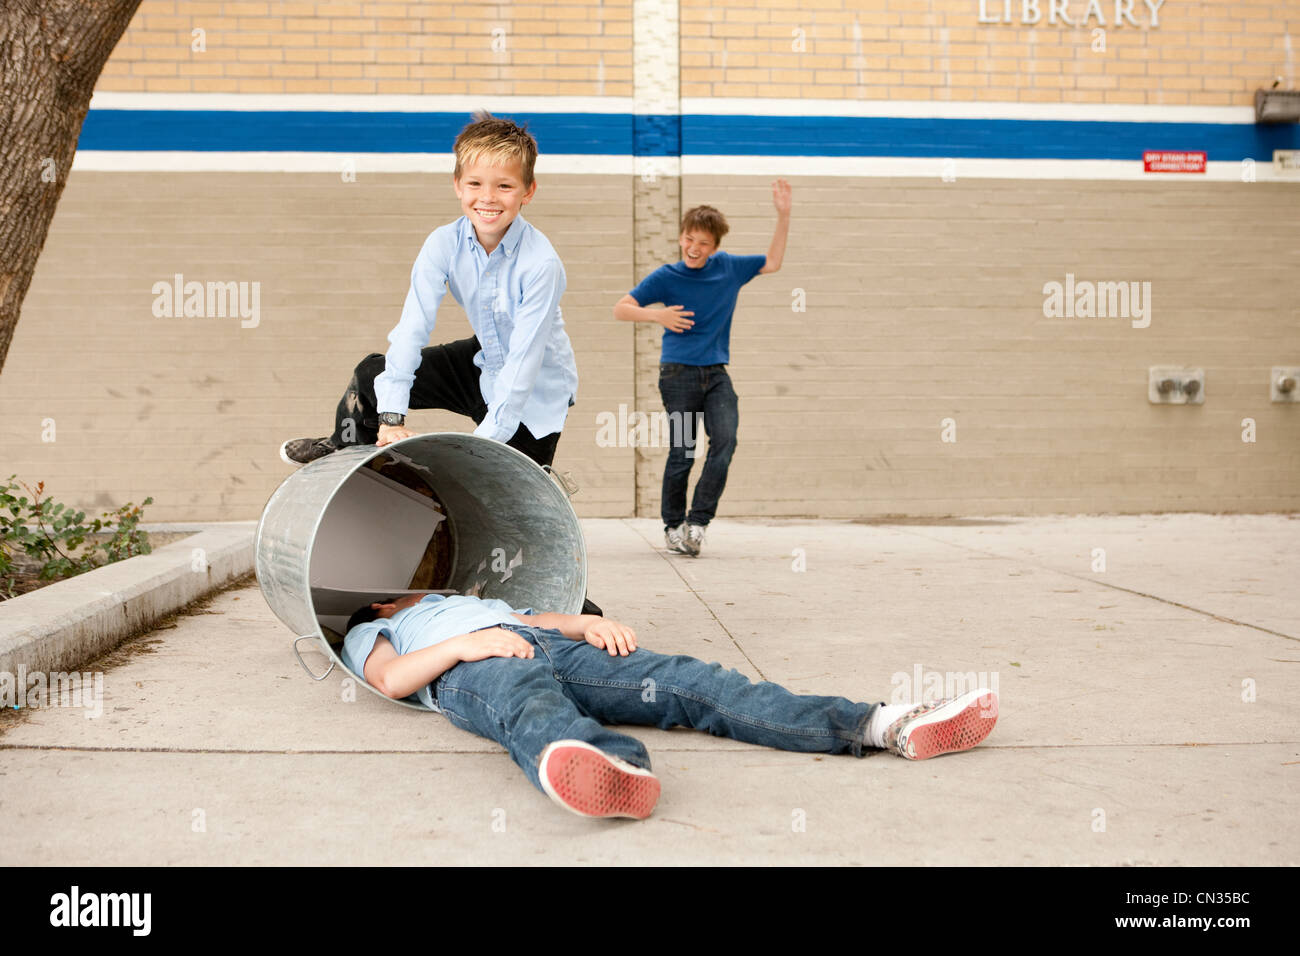 Two boys bullying another, one boy in dustbin Stock Photo